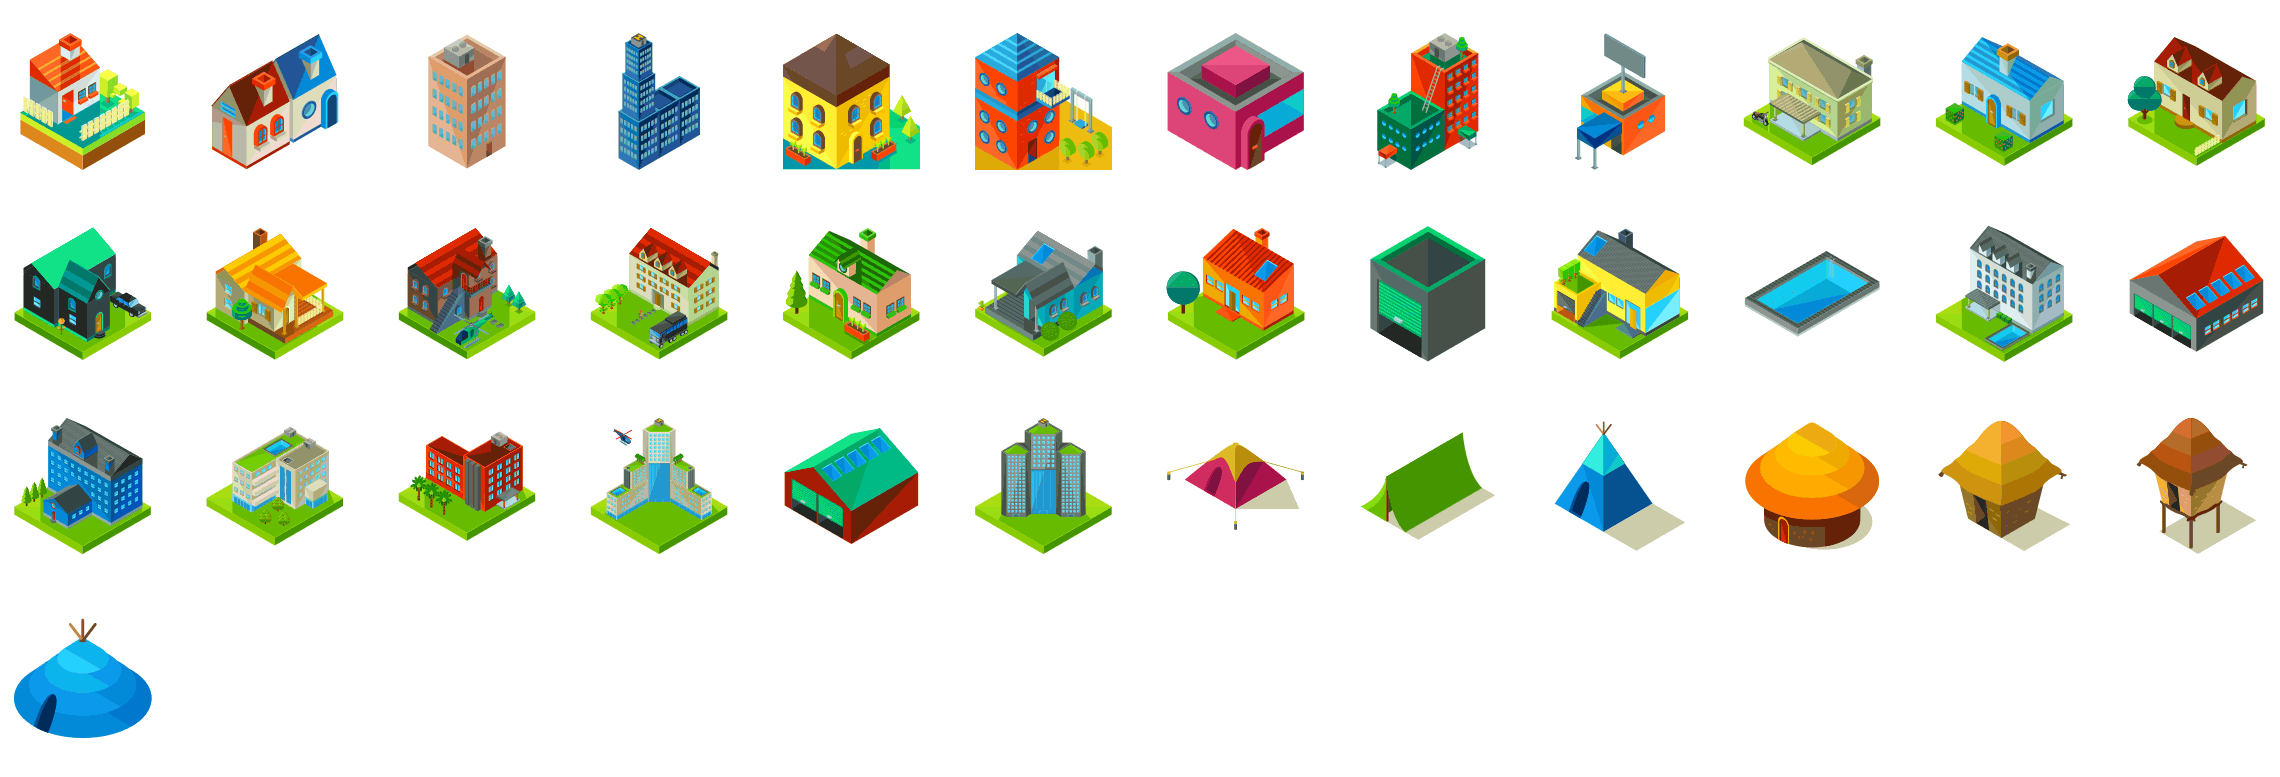 building-elements-isometric-icons-preview